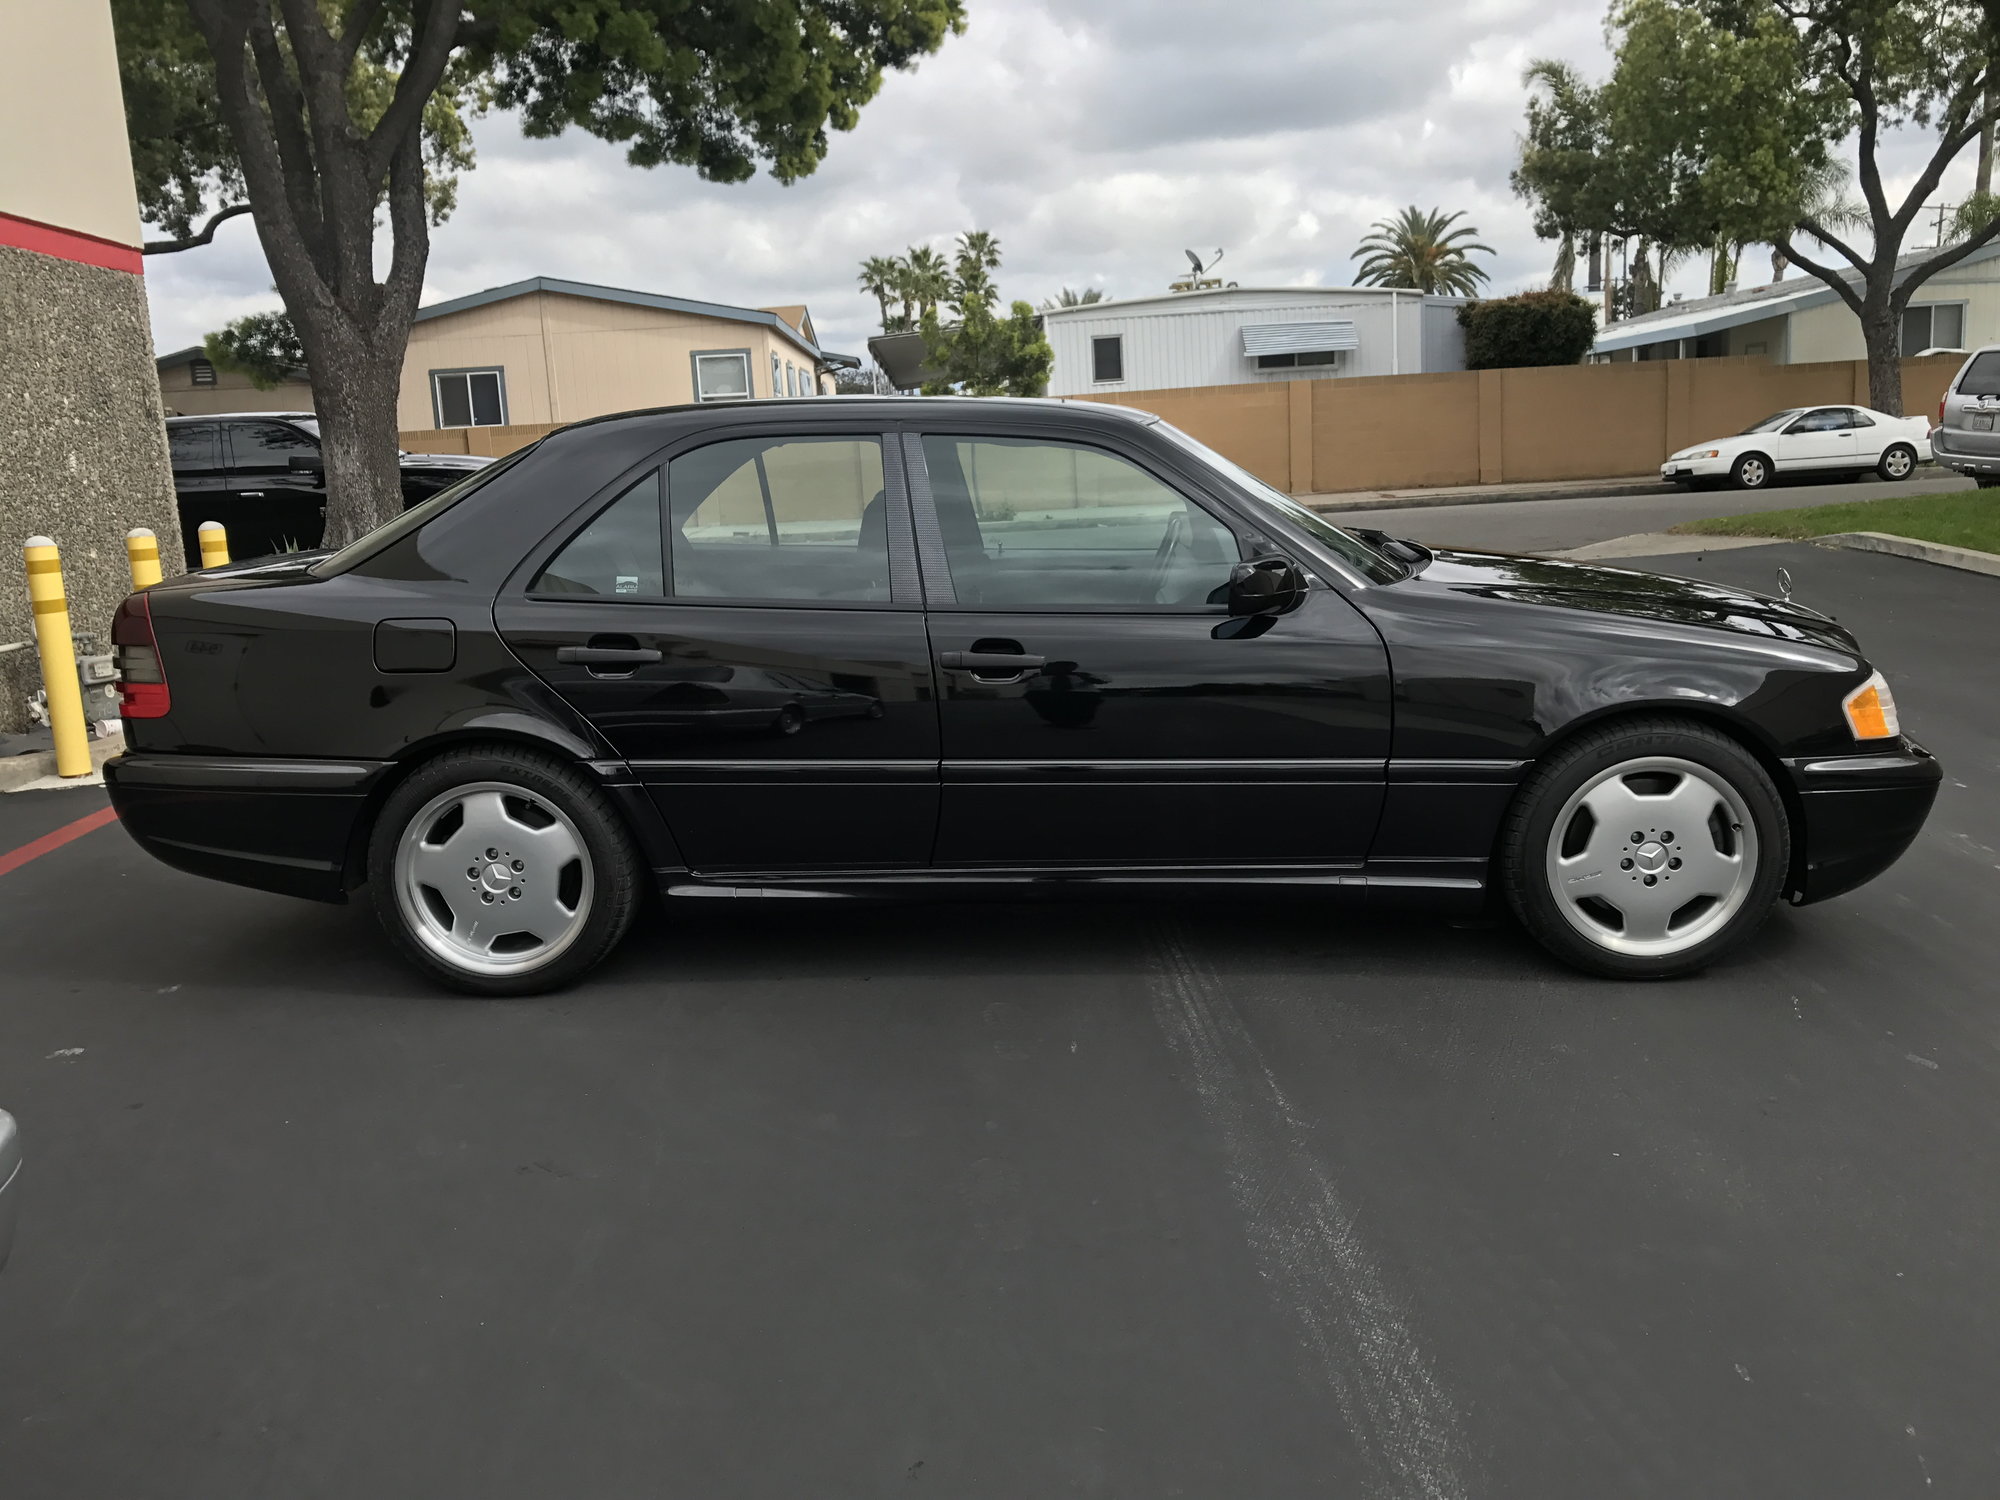 1999 Mercedes-Benz C43 AMG - 1999 Mercedes C43 AMG w202 46k miles Excellent/Records - Used - VIN WDBHA33G5XF880998 - 46,500 Miles - 8 cyl - 2WD - Automatic - Orange, CA 92869, United States